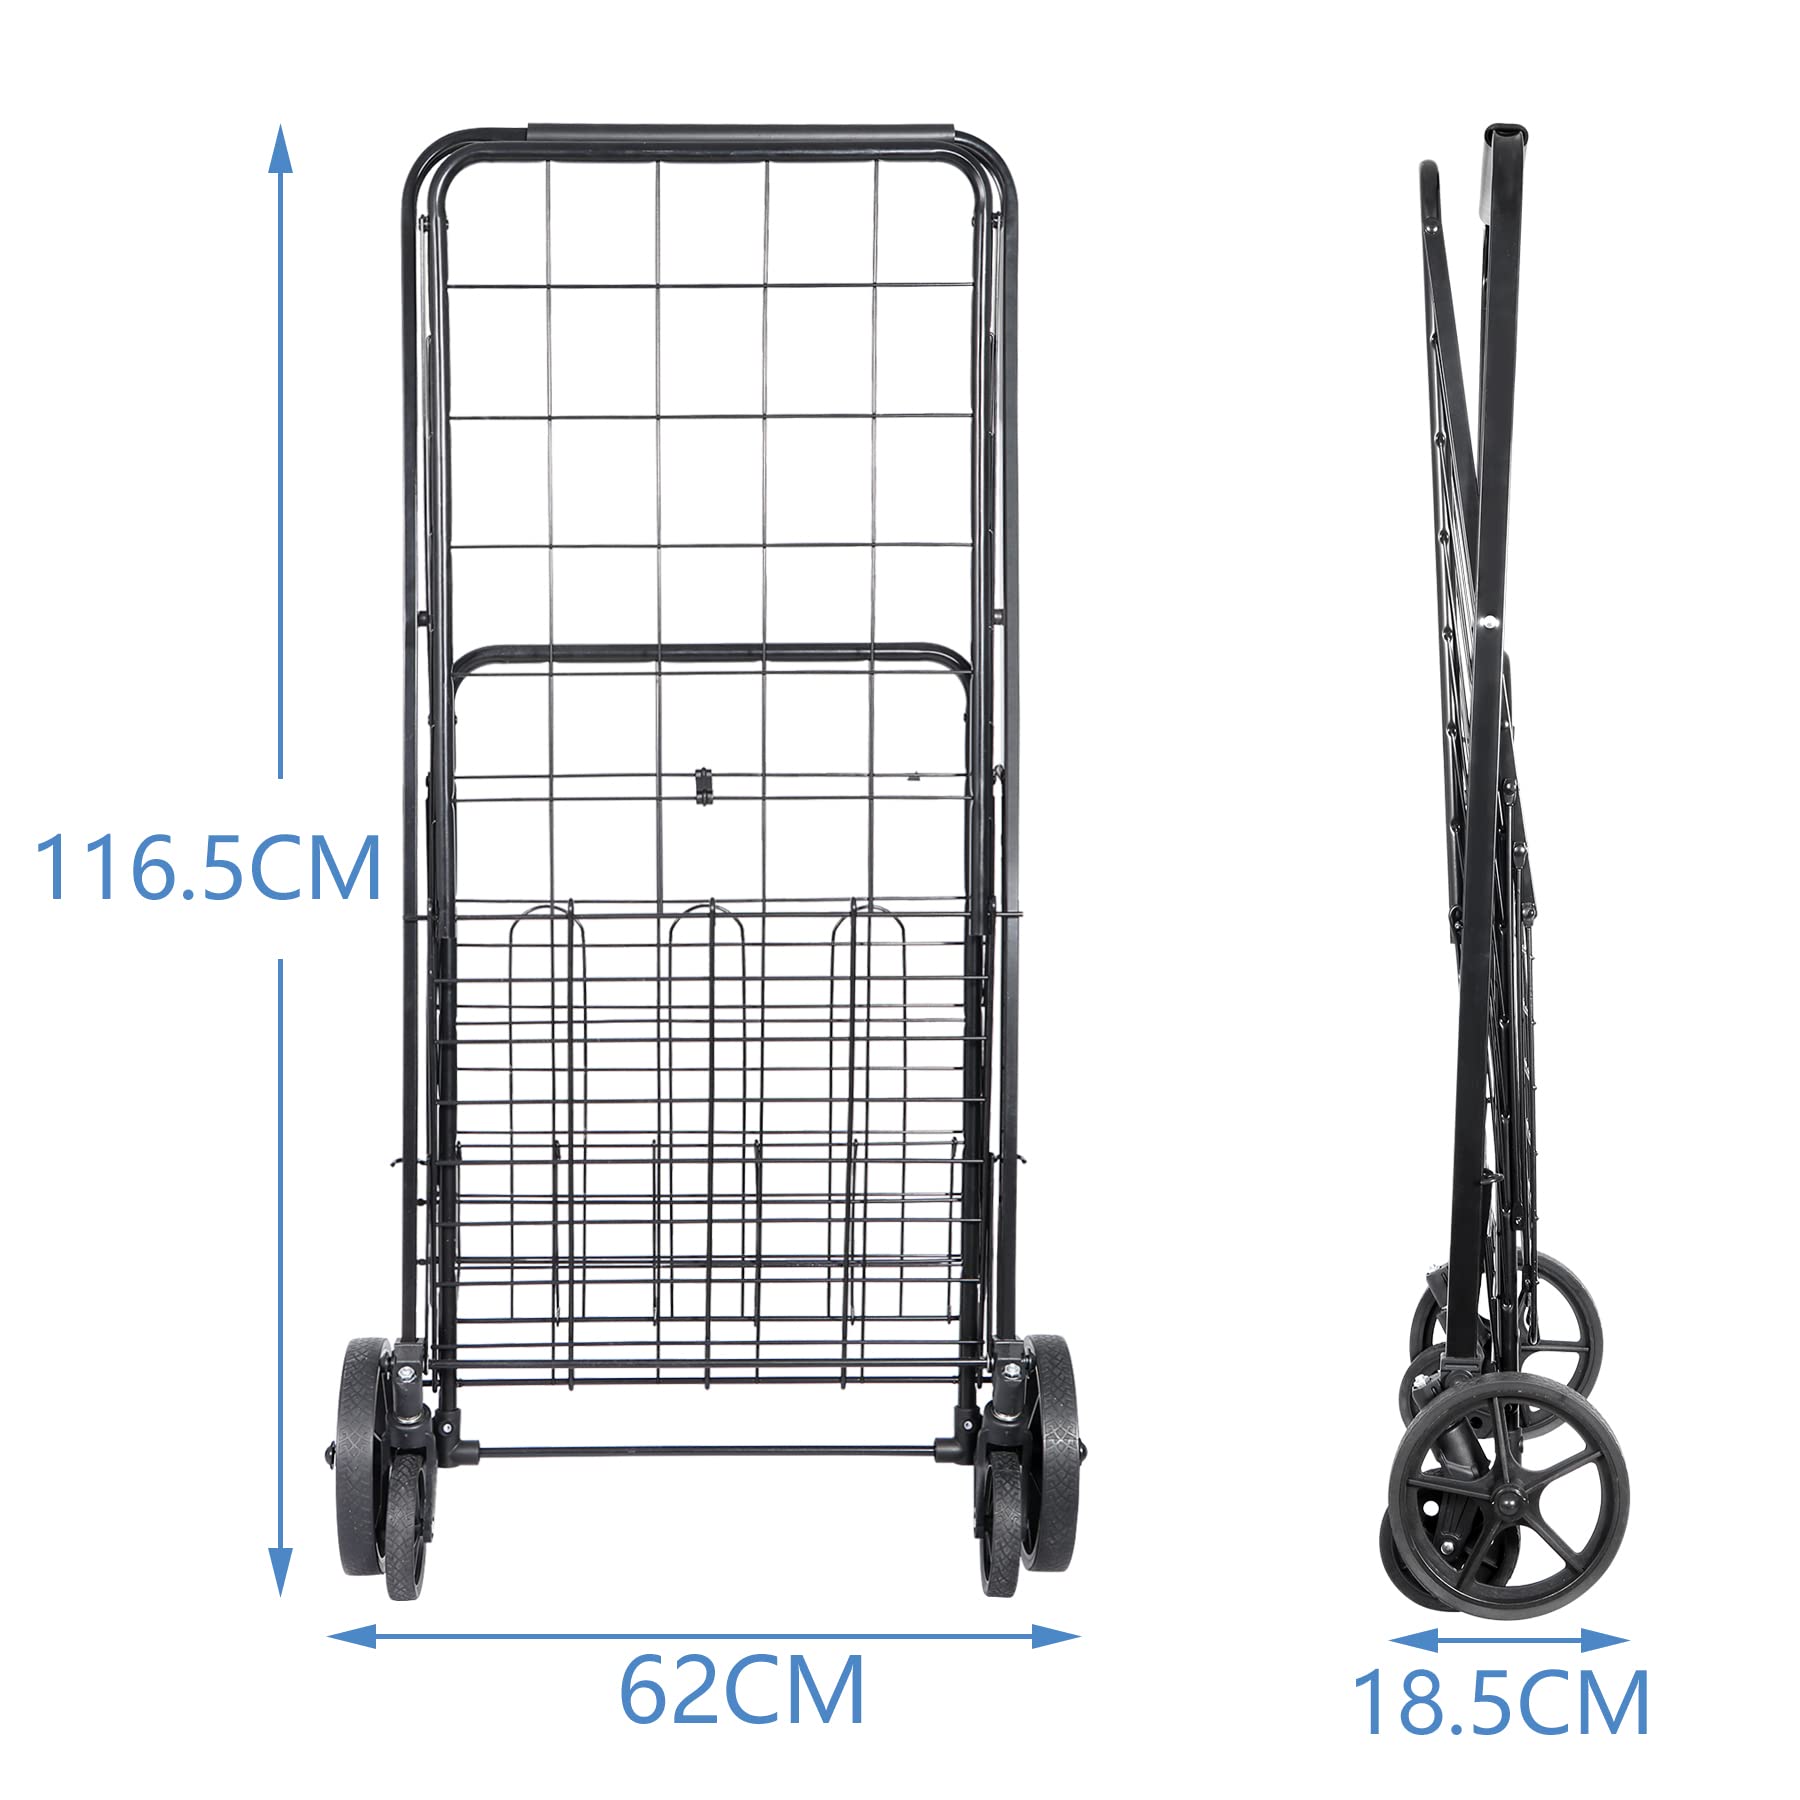 F2C Folding Shopping Cart with Wheels and Double Basket, Grocery Utility Cart Ground Rolling Cart,Collapsible Portable Cart,Compact for Shopping Laundry,Garden, Grocery,Travel, Black¡­